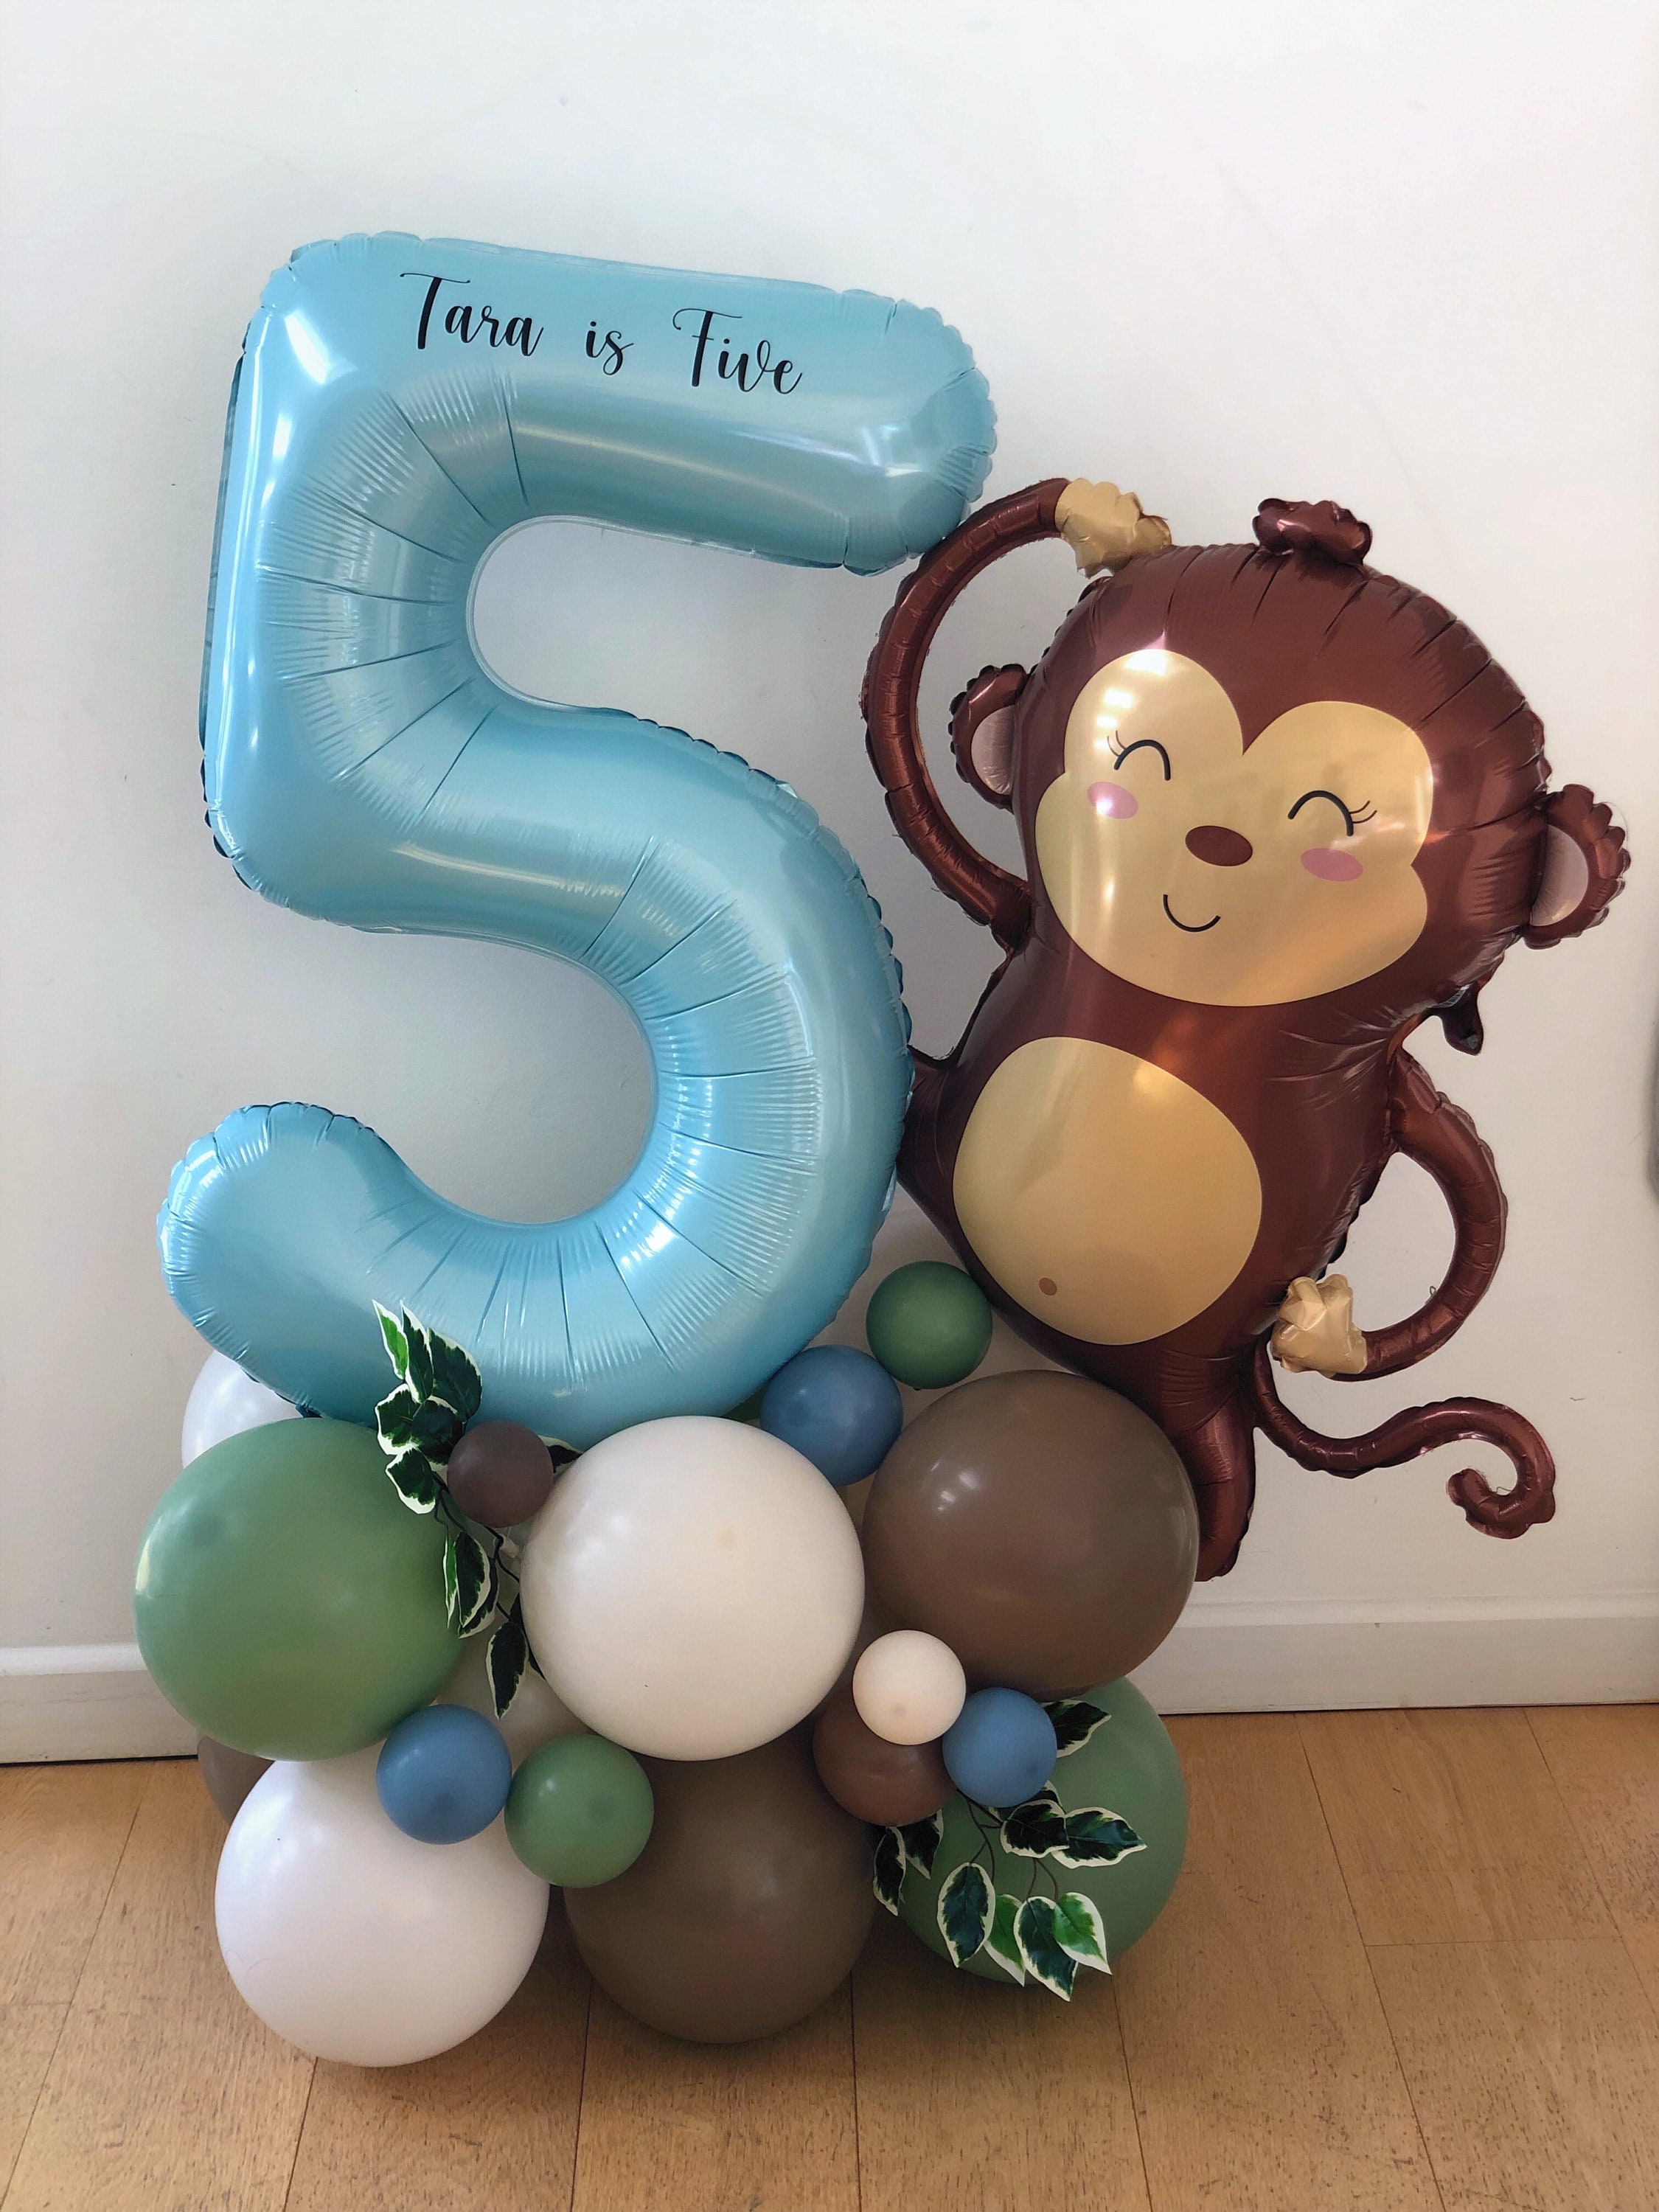 High Quality Large Monkey Balloon Sculpture, Any Number, Safari